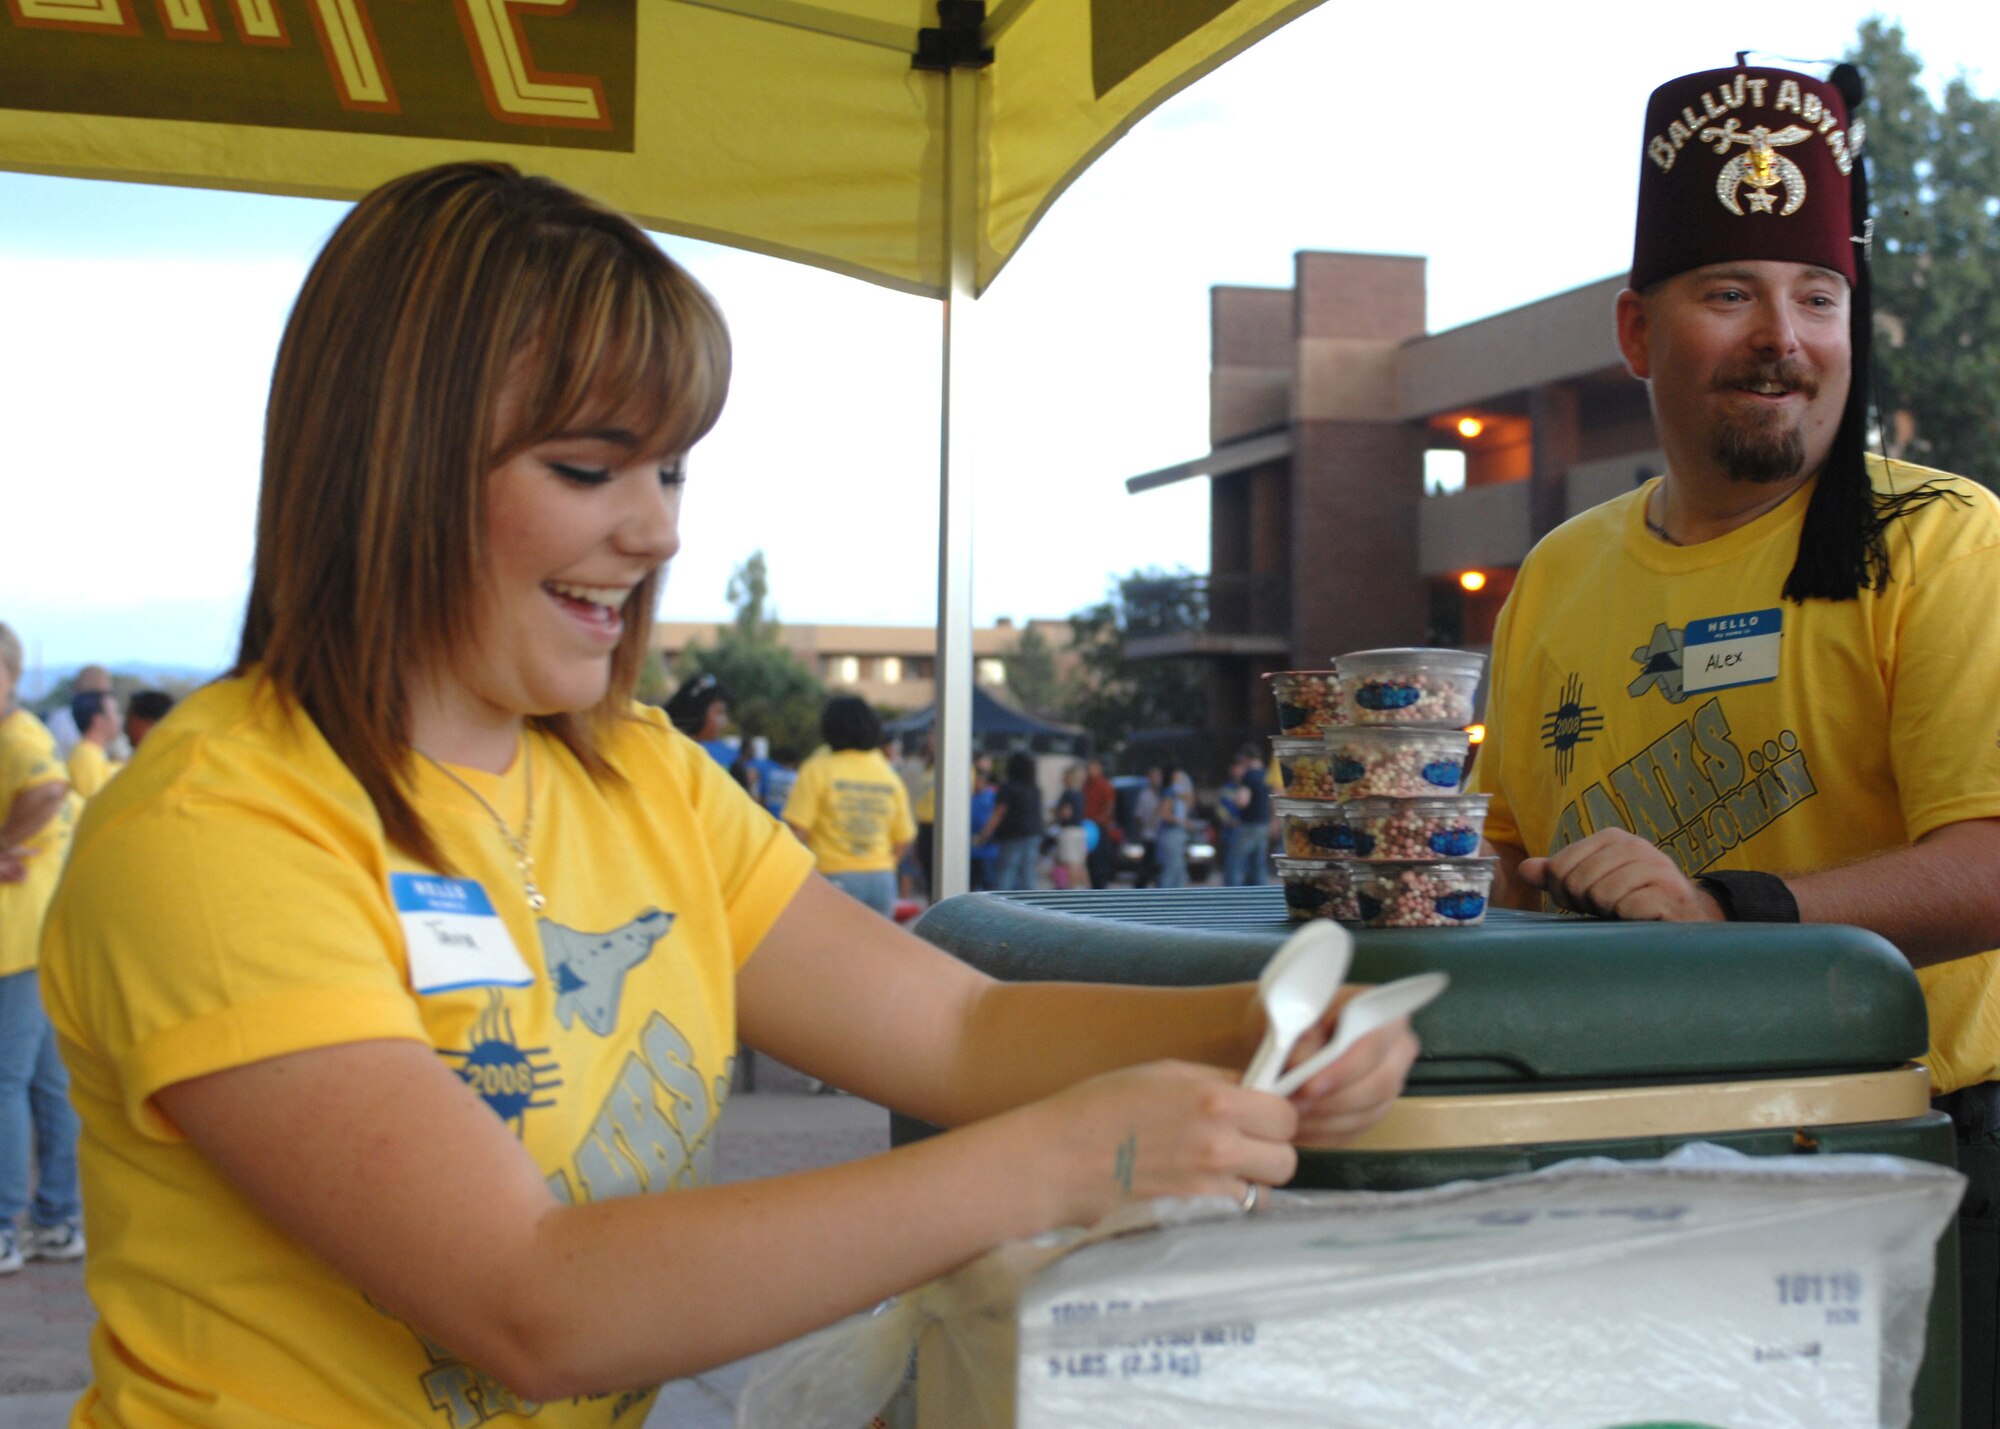 Radio Disc Jockey Tanya from 94 KEY serves Ittibitz Ice cream to Shriner Alex at the Thanks team Holloman event held at Holloman Air Force Base, N.M., September 19. All three radio stations at the event served ice cream for everyone to enjoy while listening to music. (U.S. Air Force photo/Airman 1st Class Veronica Salgado)
 
